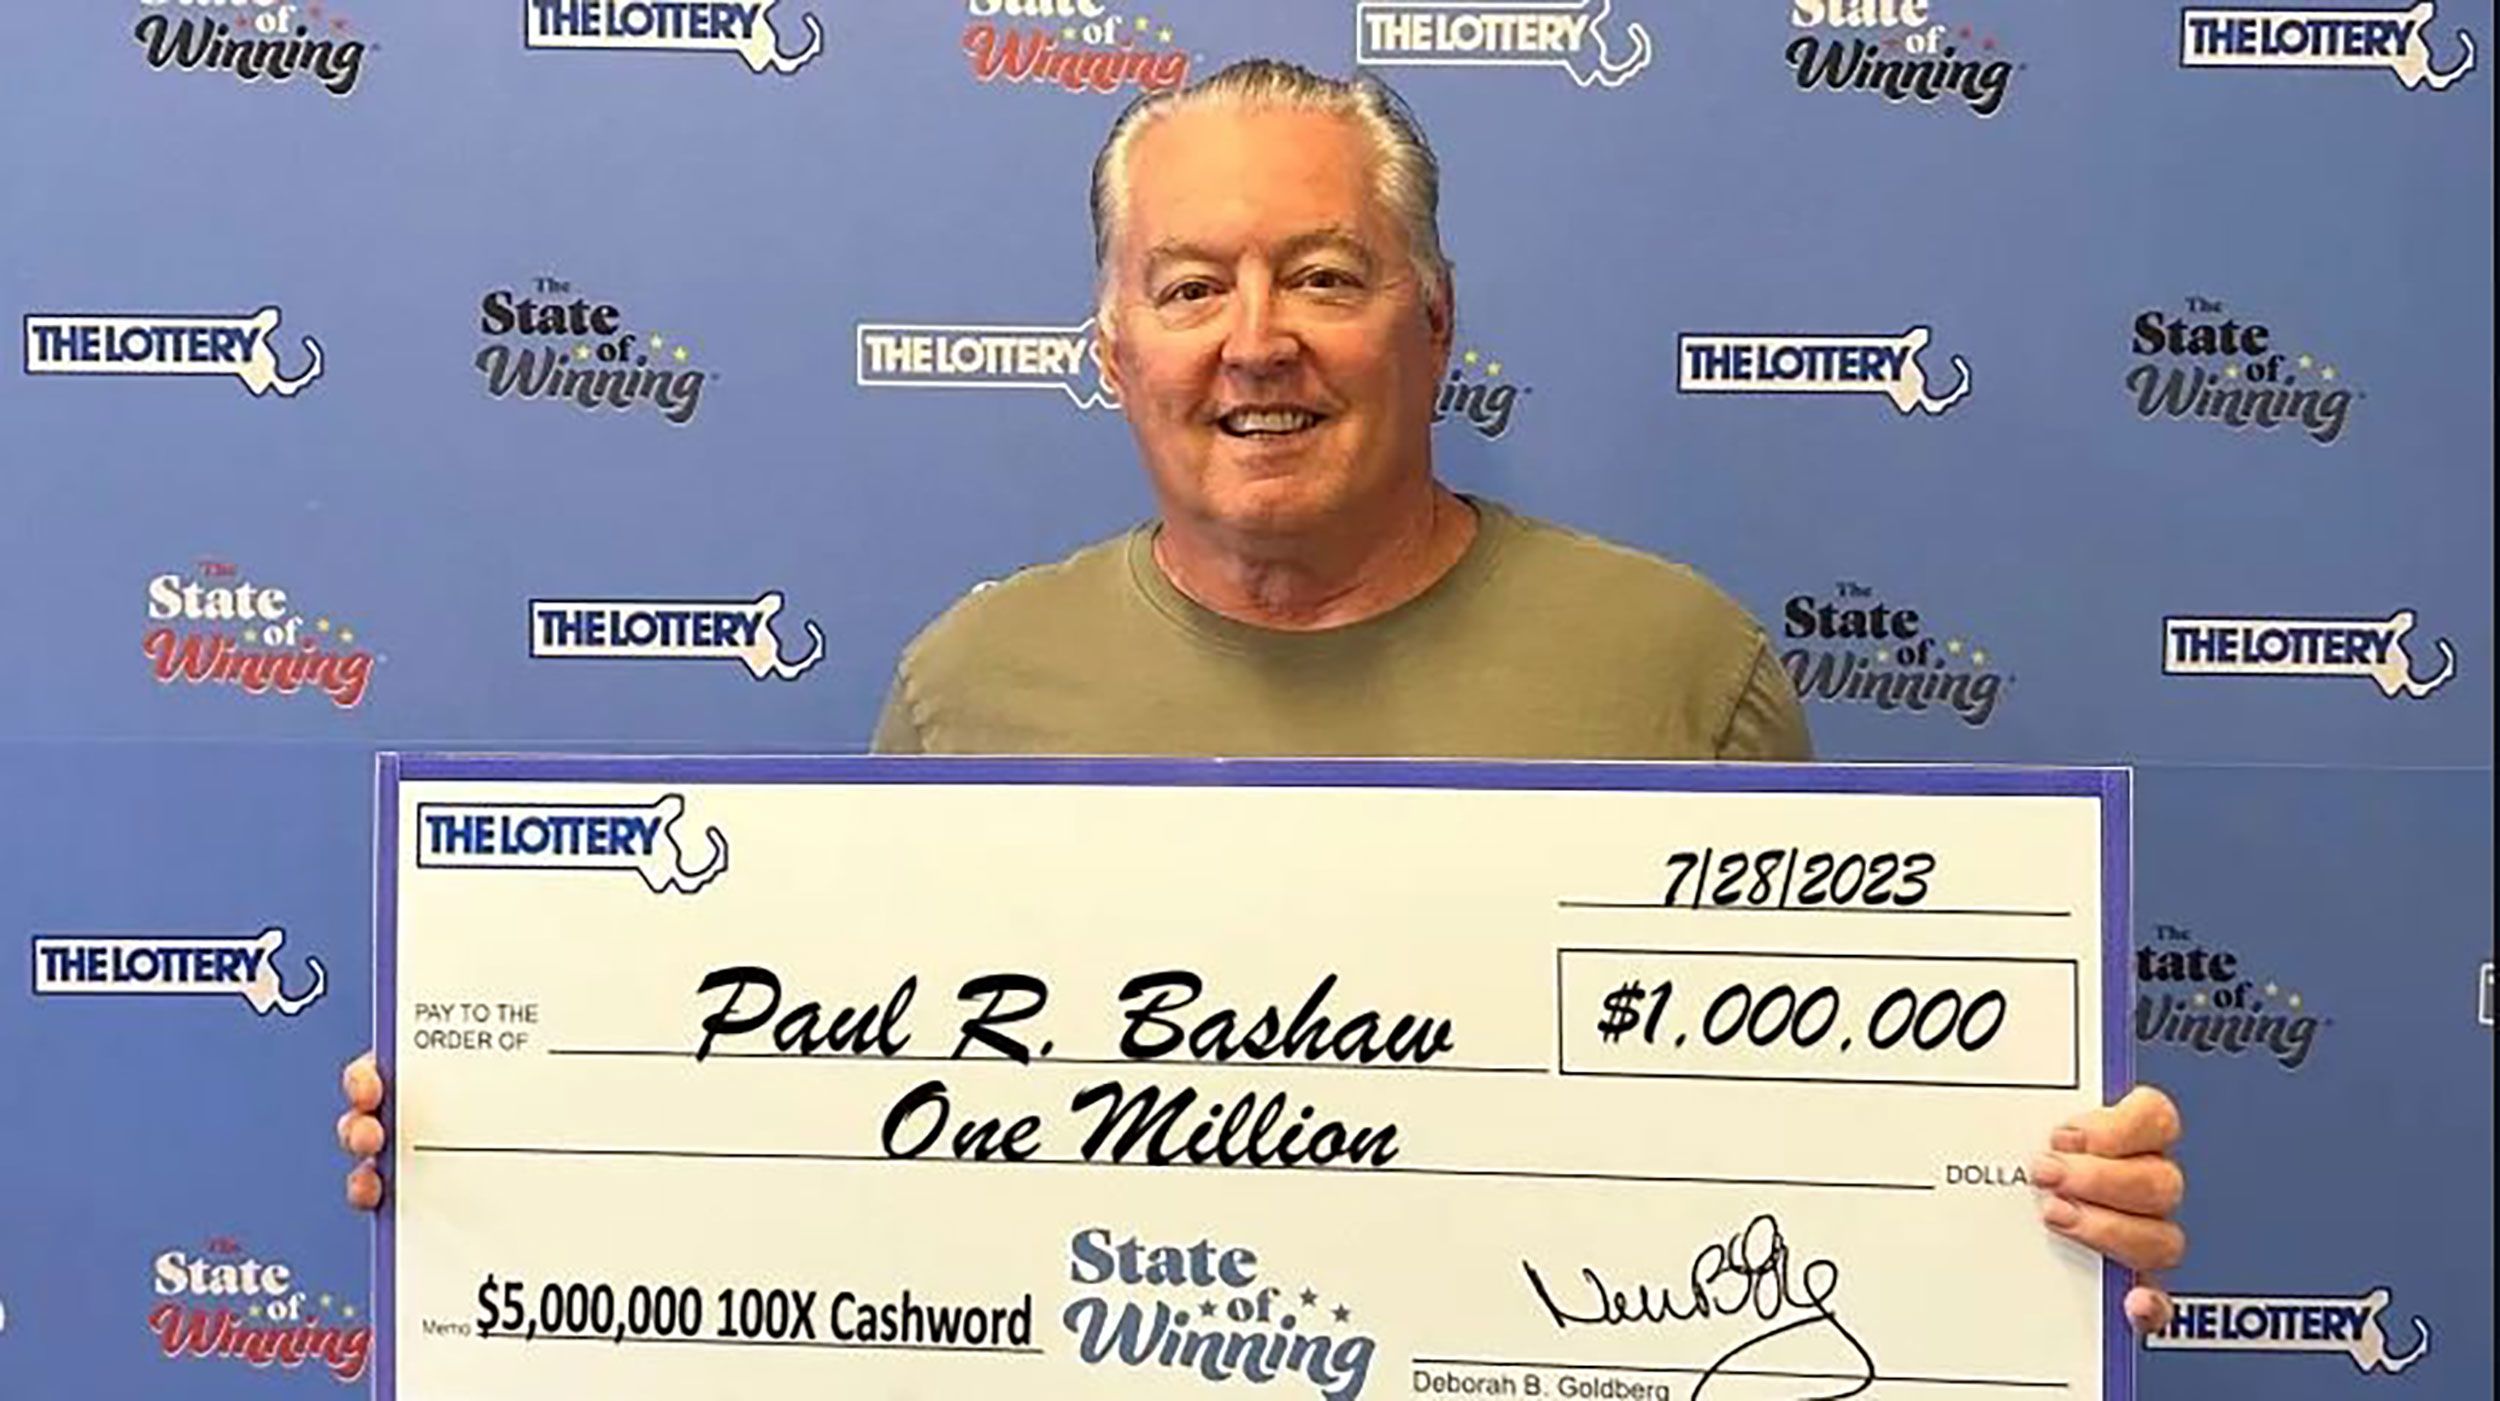 Trucker wins $1 million lottery prize 3 days after announcing plan to retire